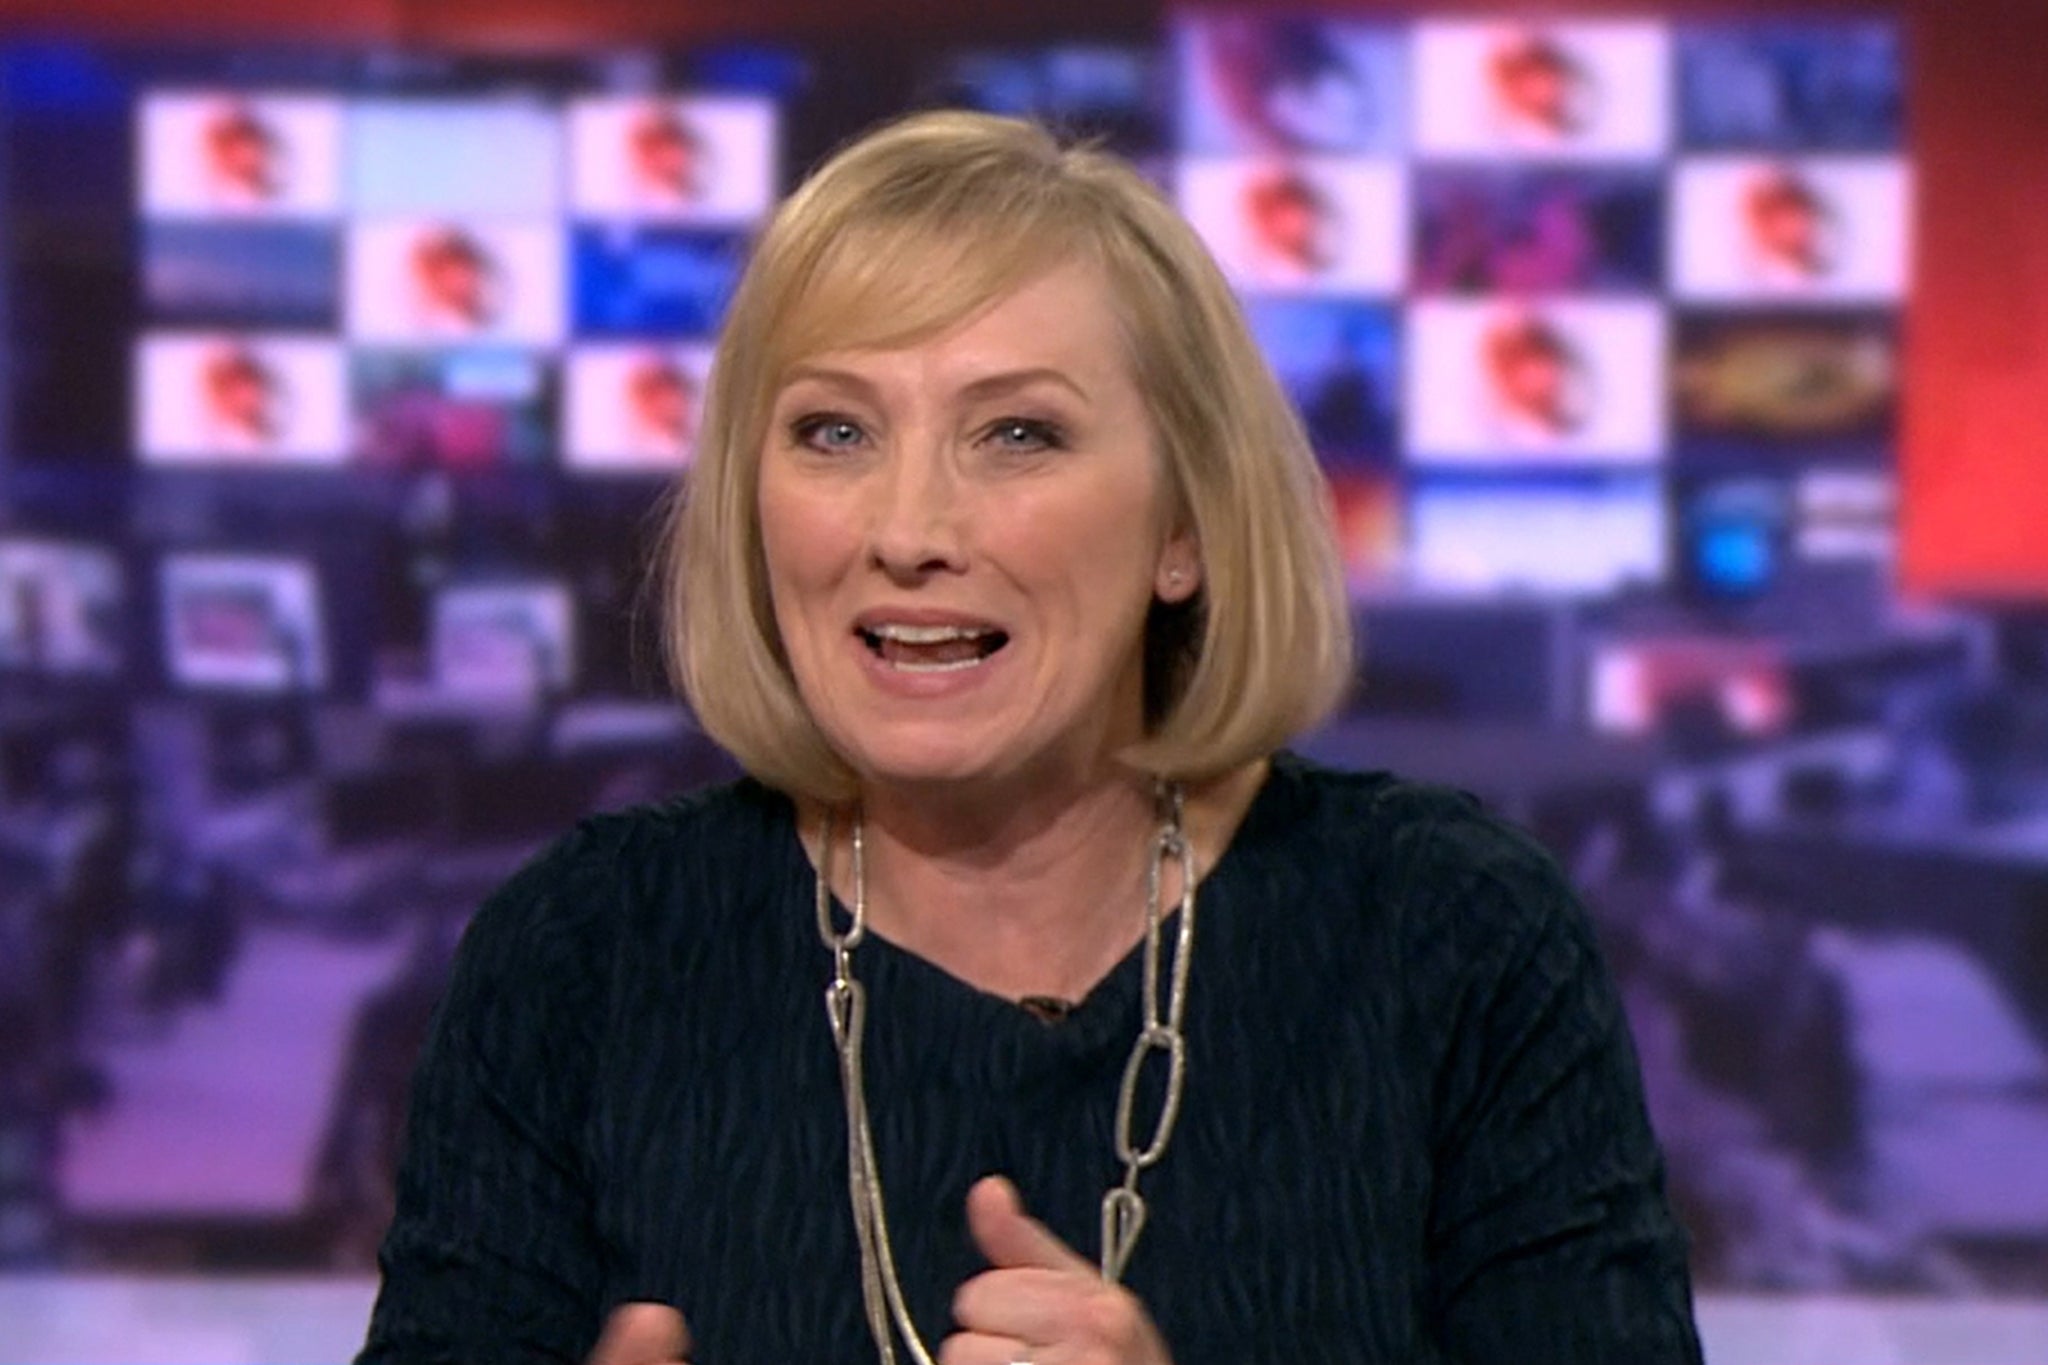 Newsreader Martine Croxall has accused the BBC of age and sex discrimination